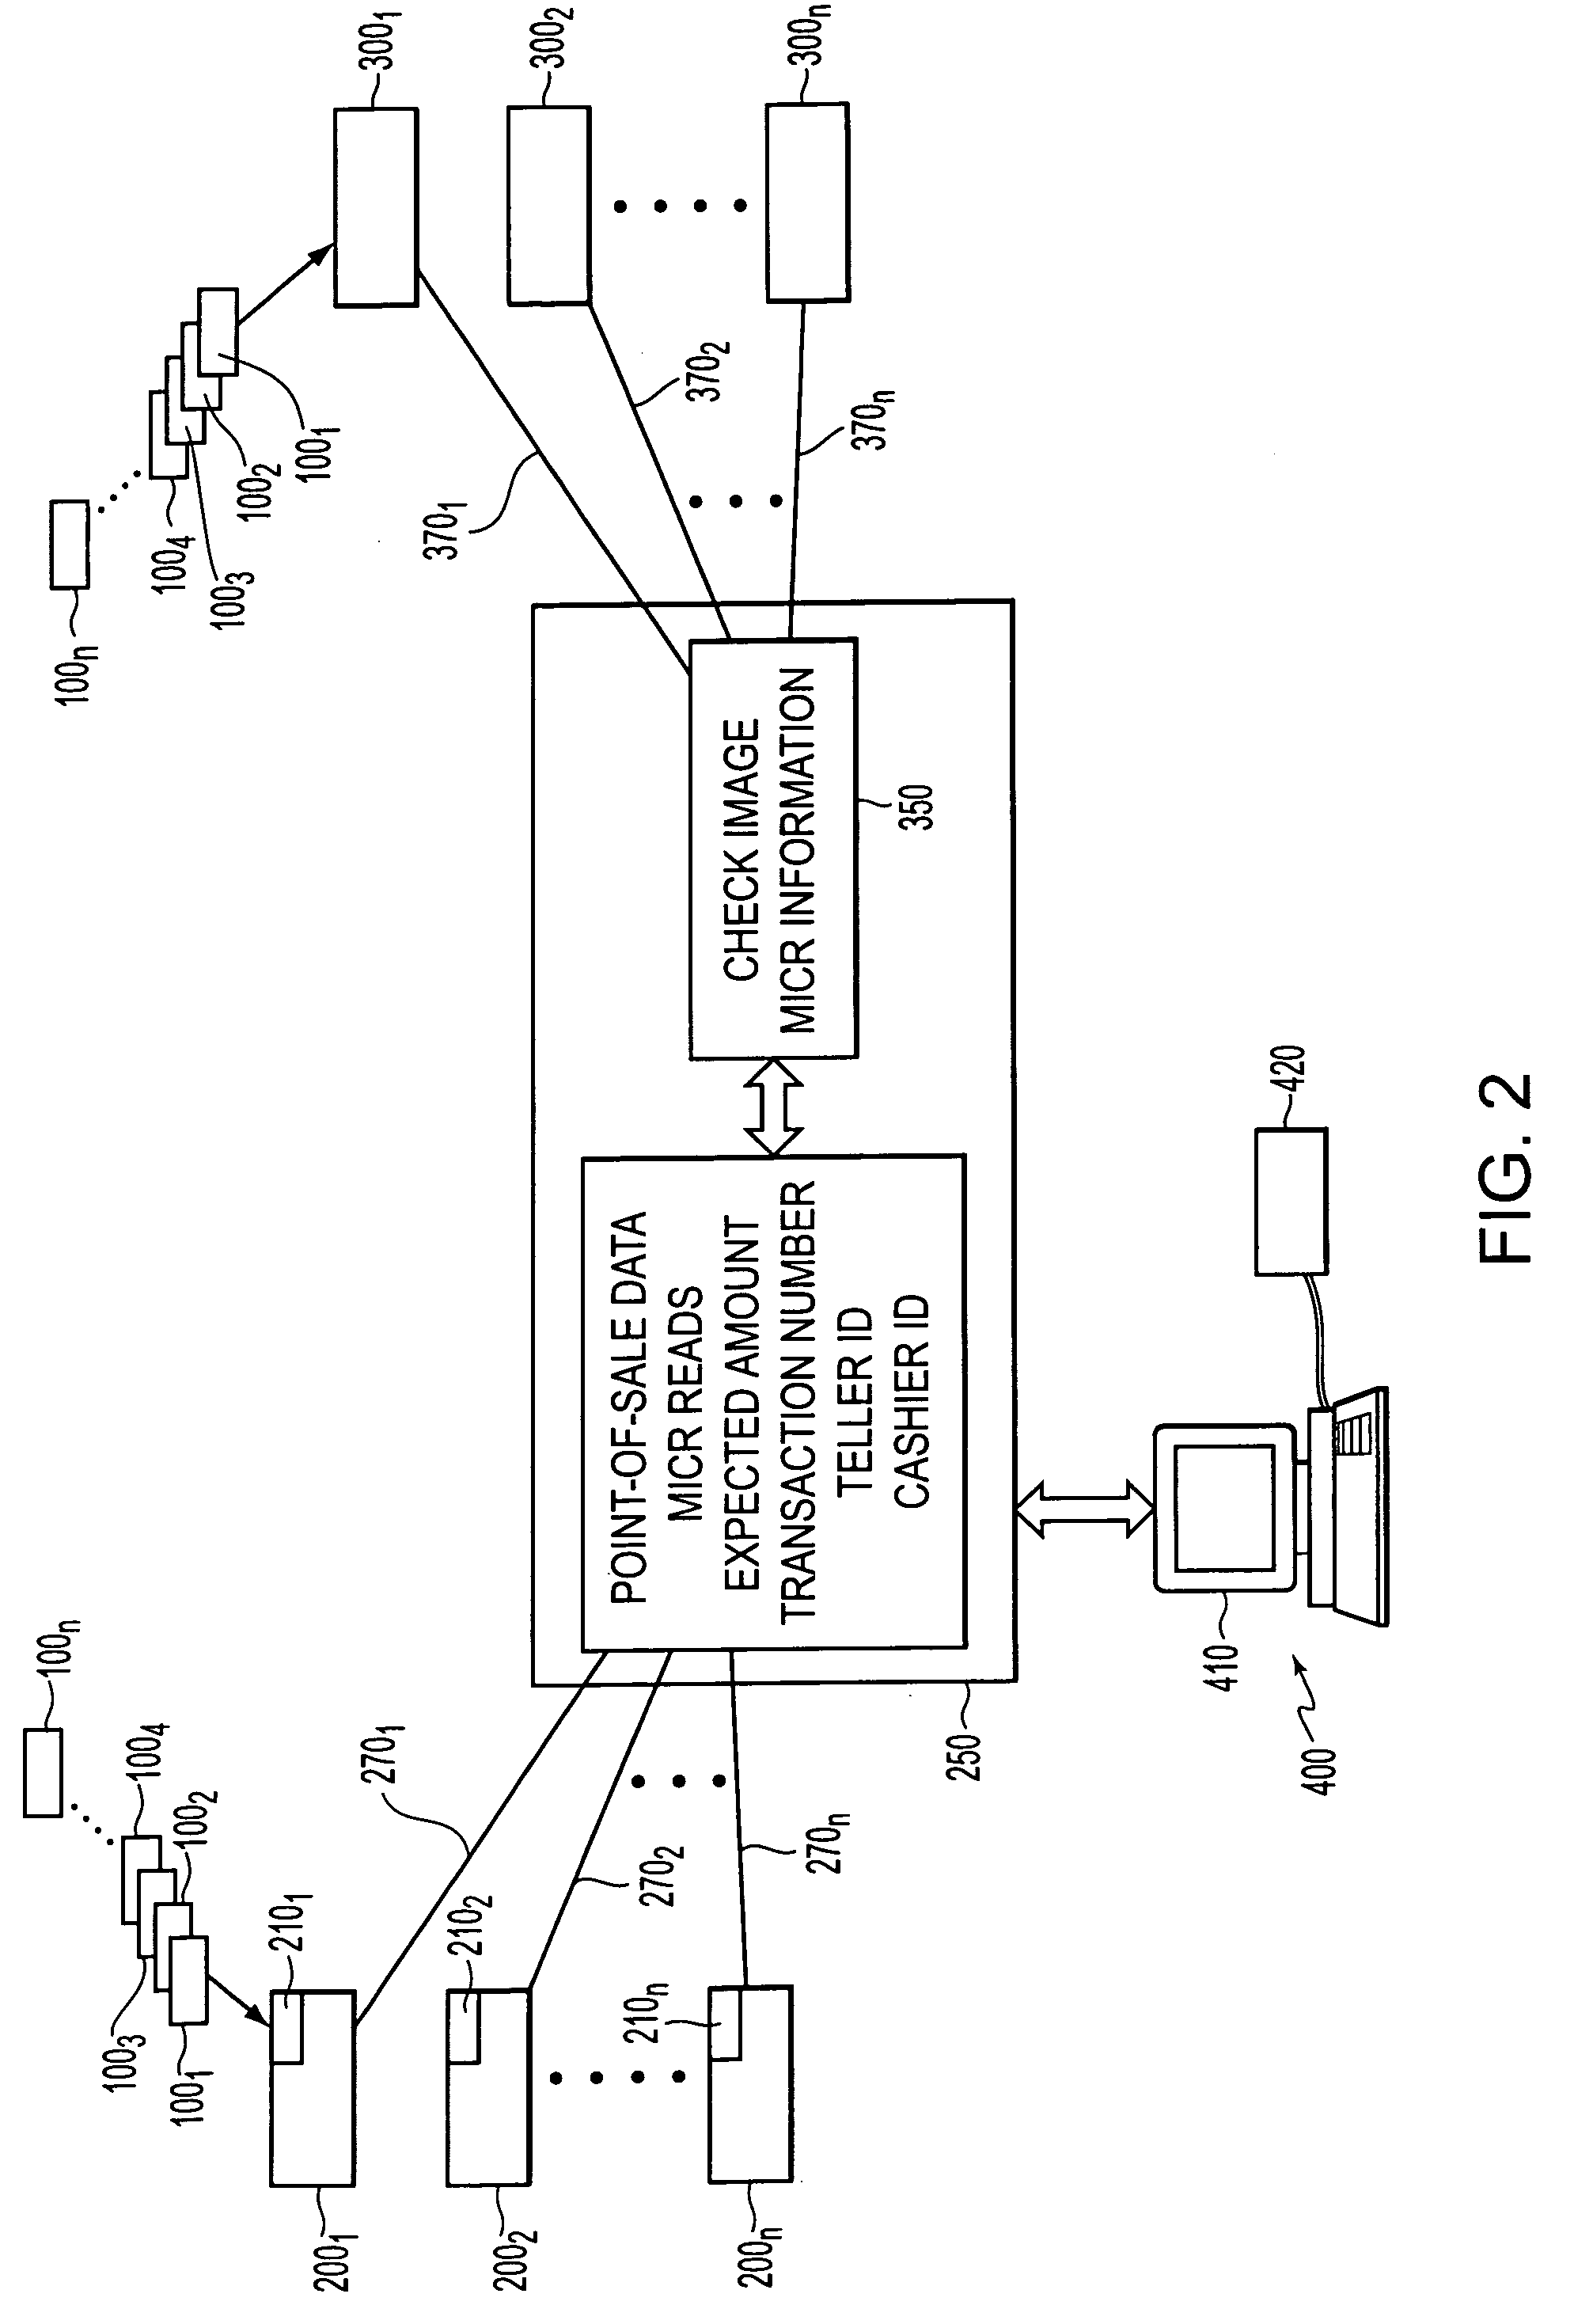 Method and apparatus for processing checks